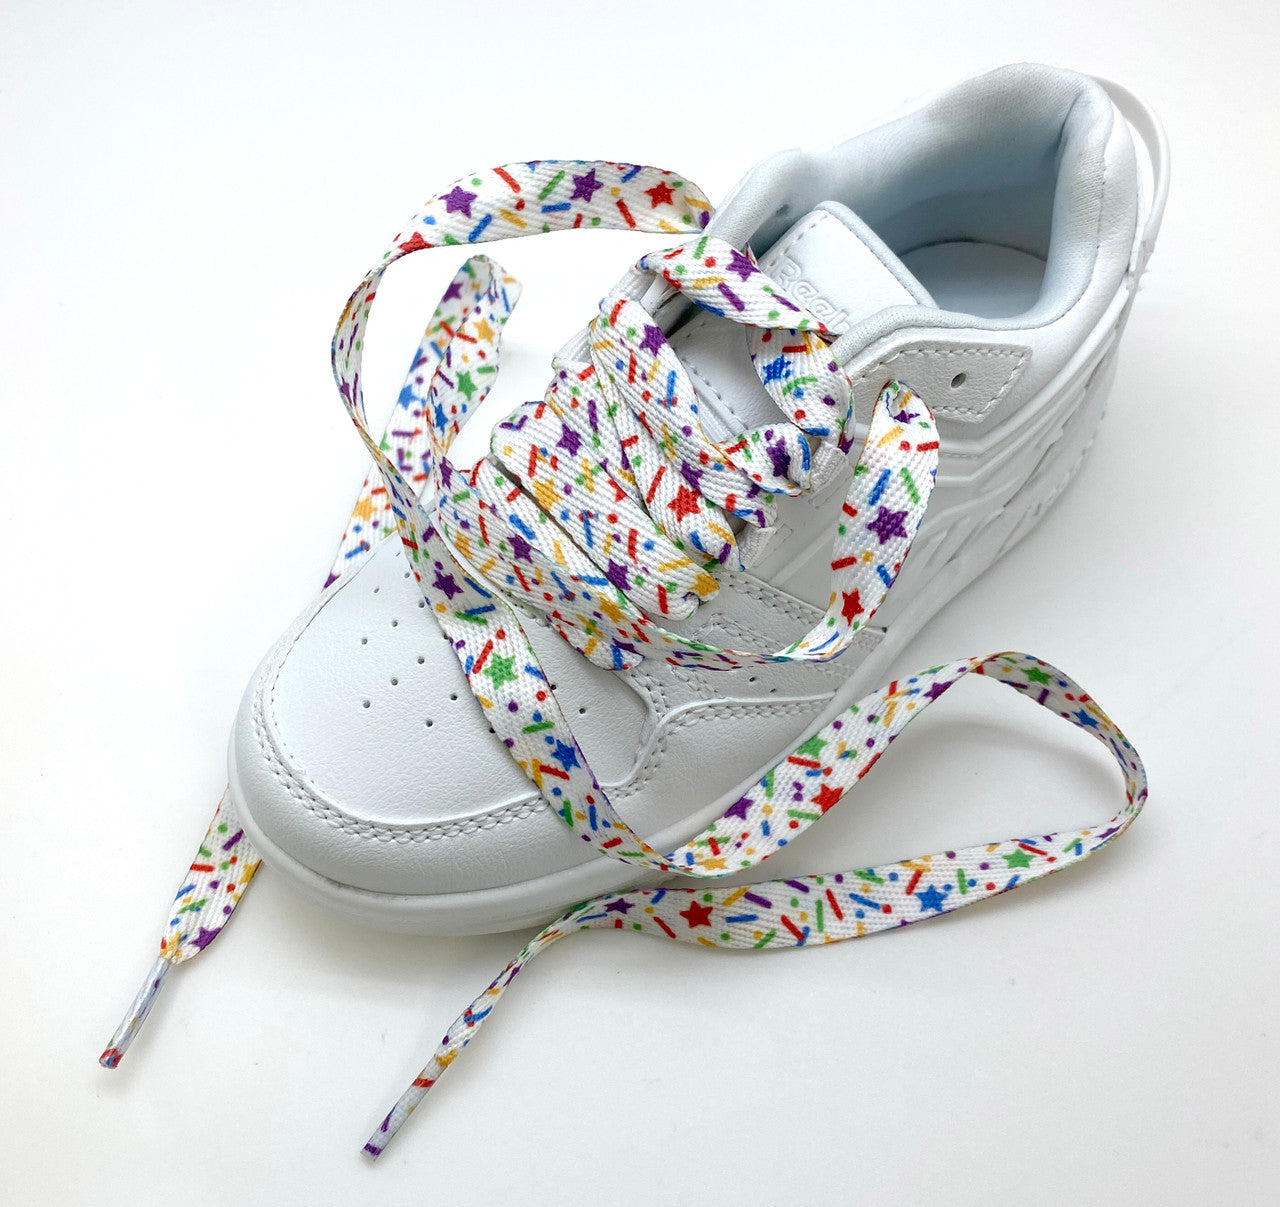 Shoelaces with sprinkles in primary colors printed on standard shoelace material 54" long